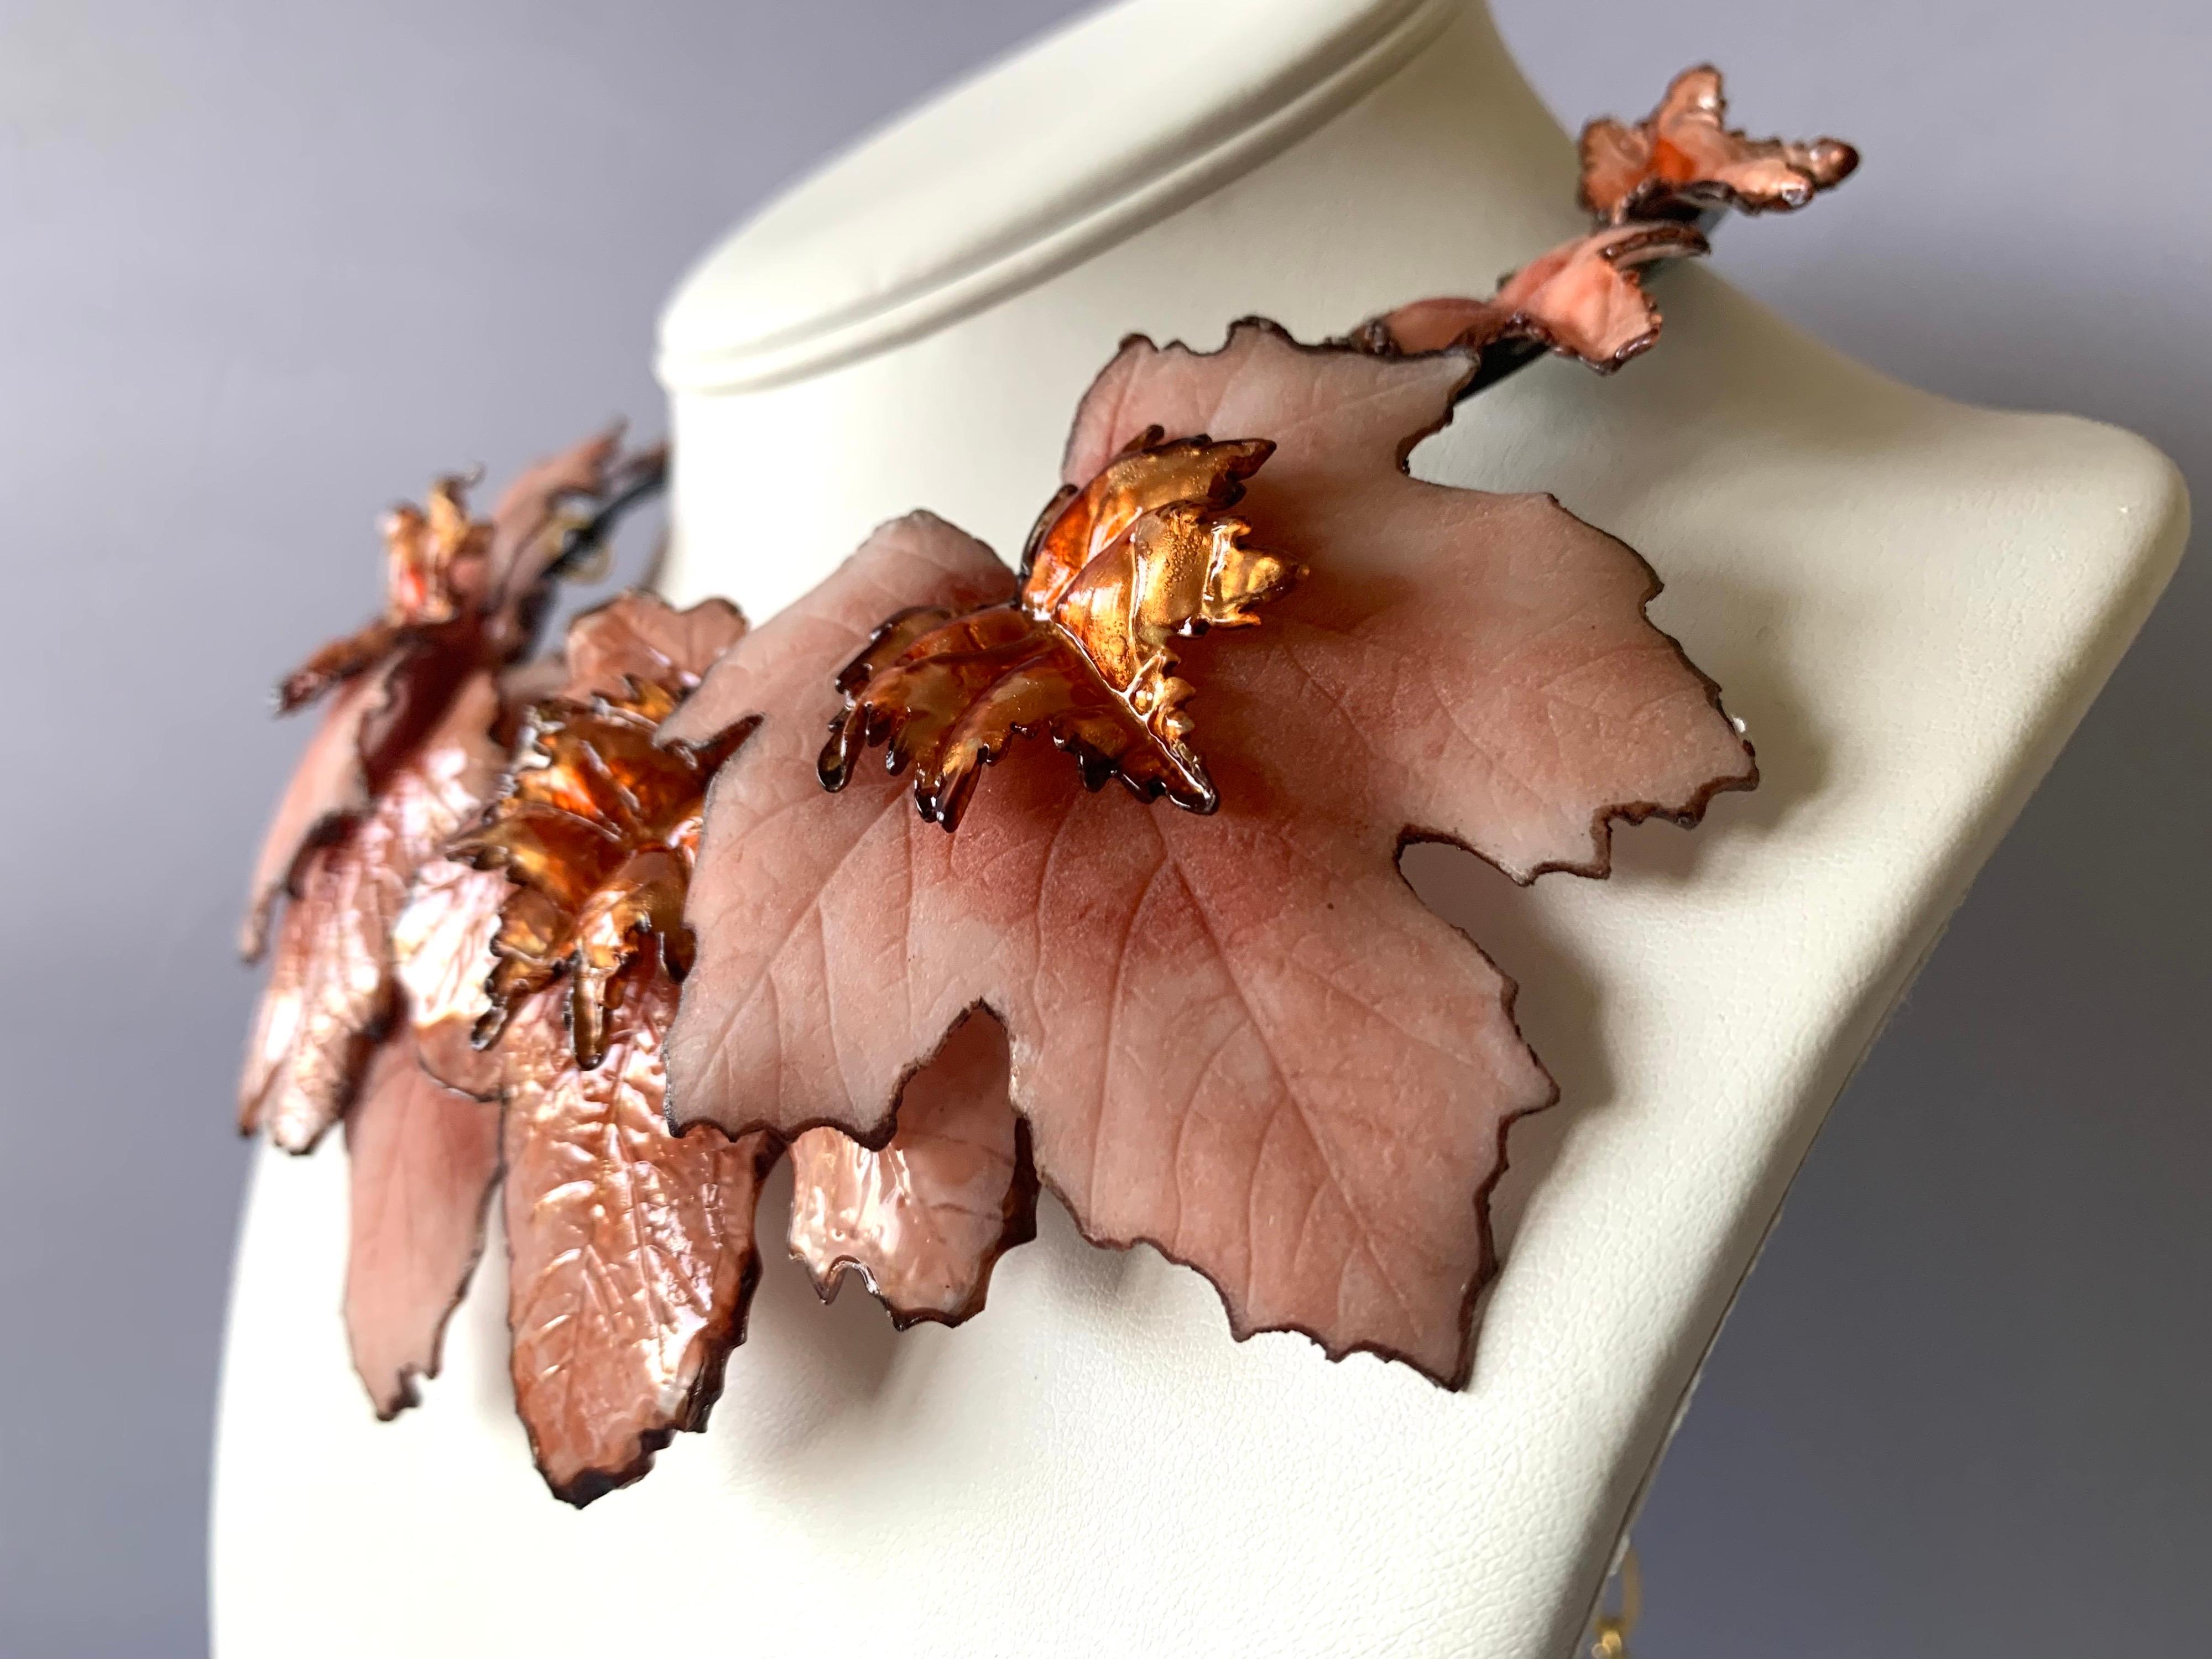 Contemporary artisanal statement necklace comprised out three-dimensional resin pink maple leaves - the leaves have metallic accents at the center giving the necklace depth and sophistication. Handcrafted in France by Cilea Paris.